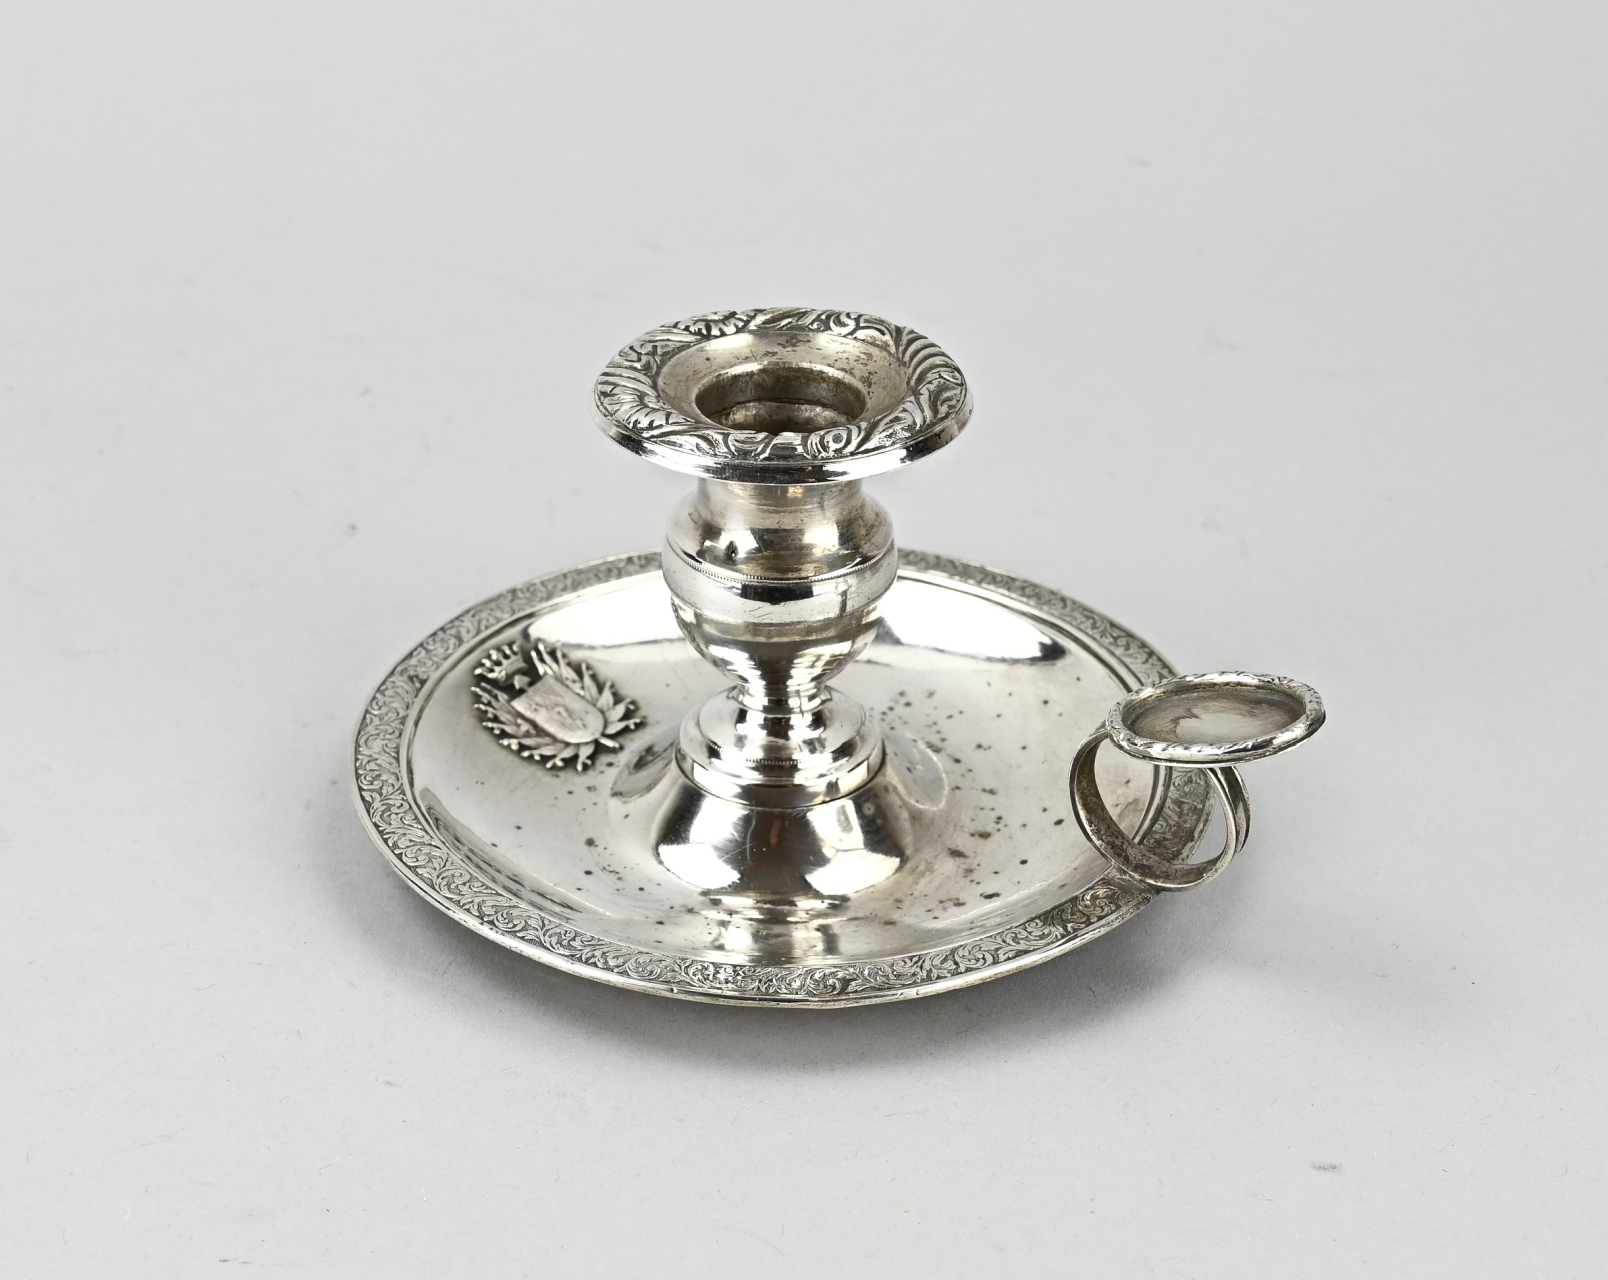 Silver sconce